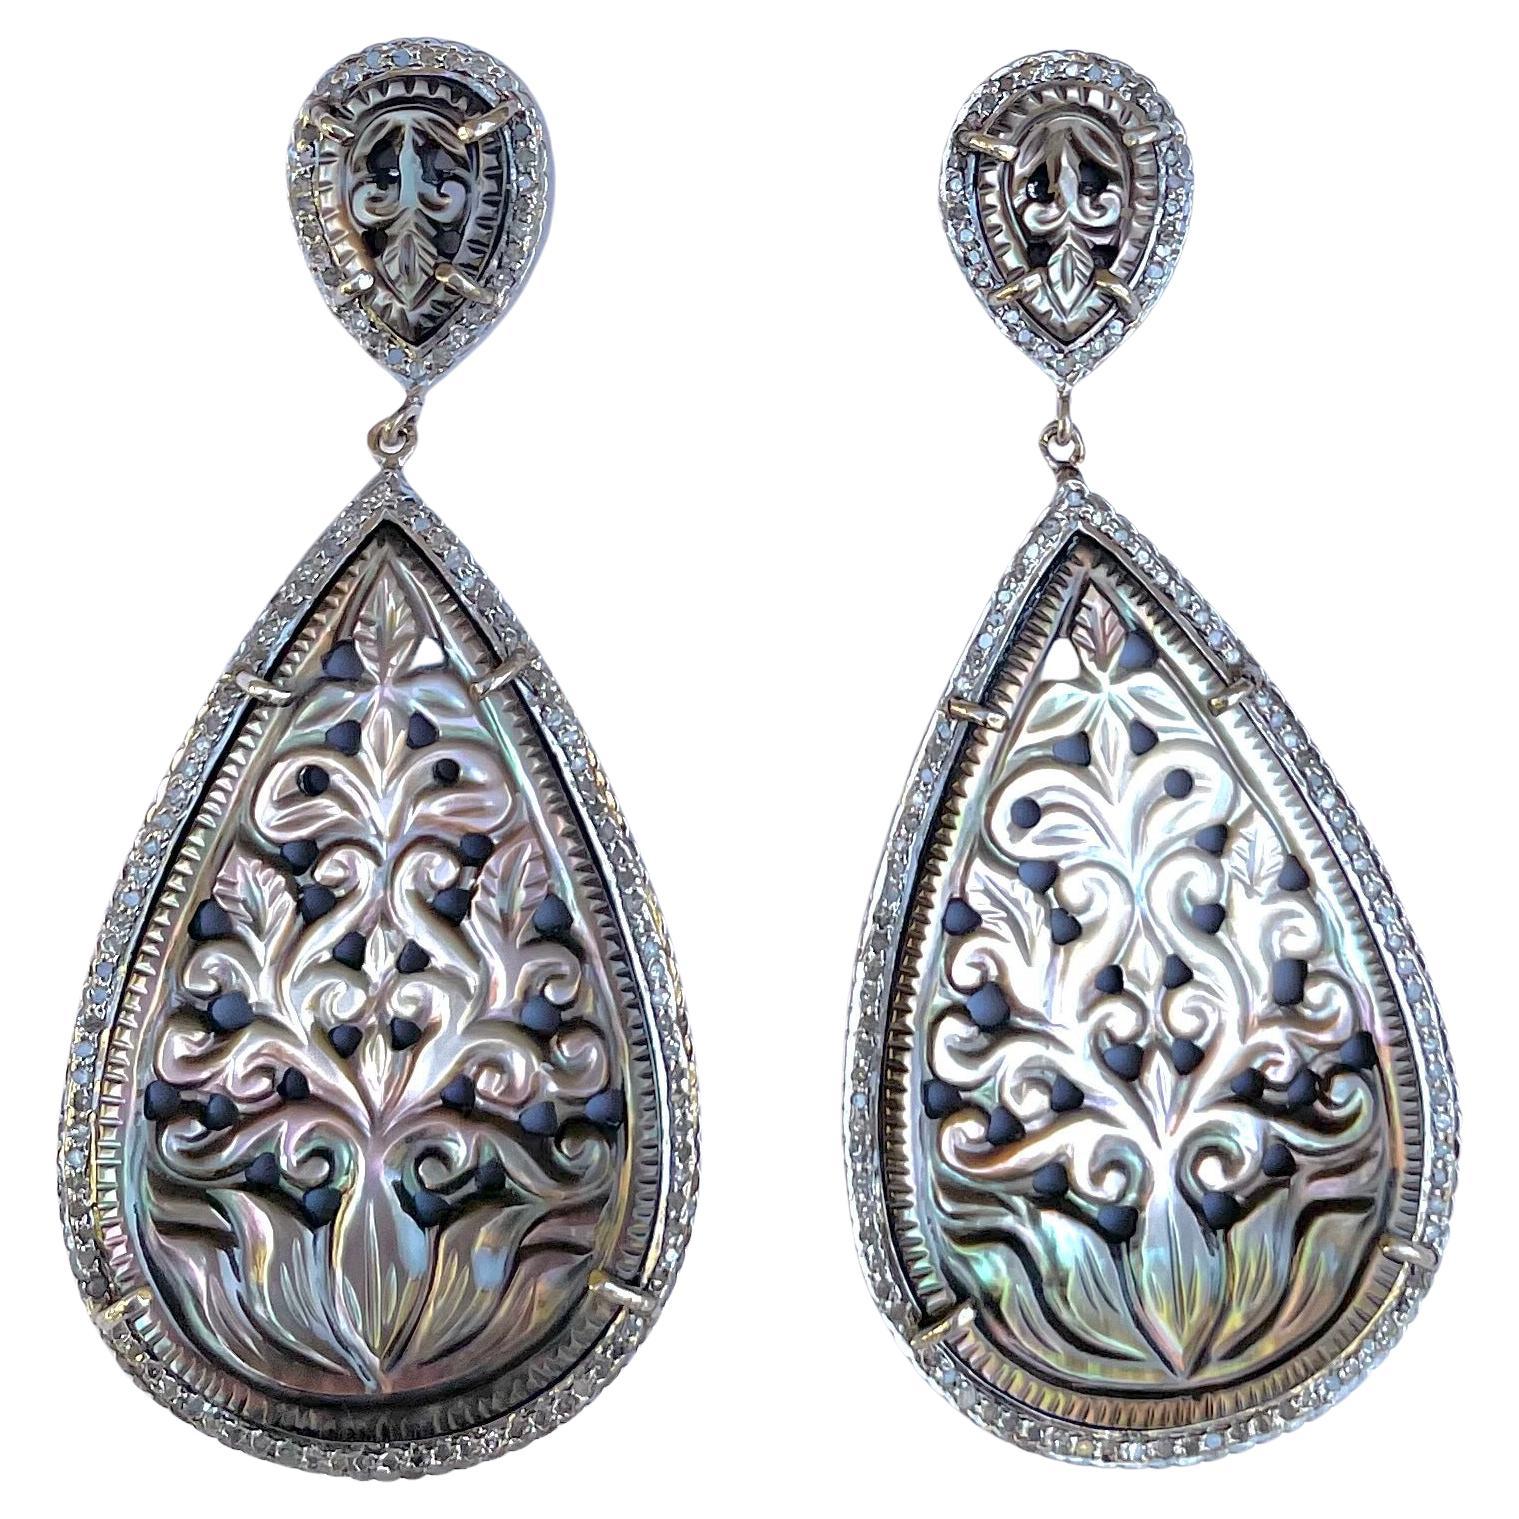 84 Carats Carved Iridescent Mother of Pearl with Pave Diamond Earrings